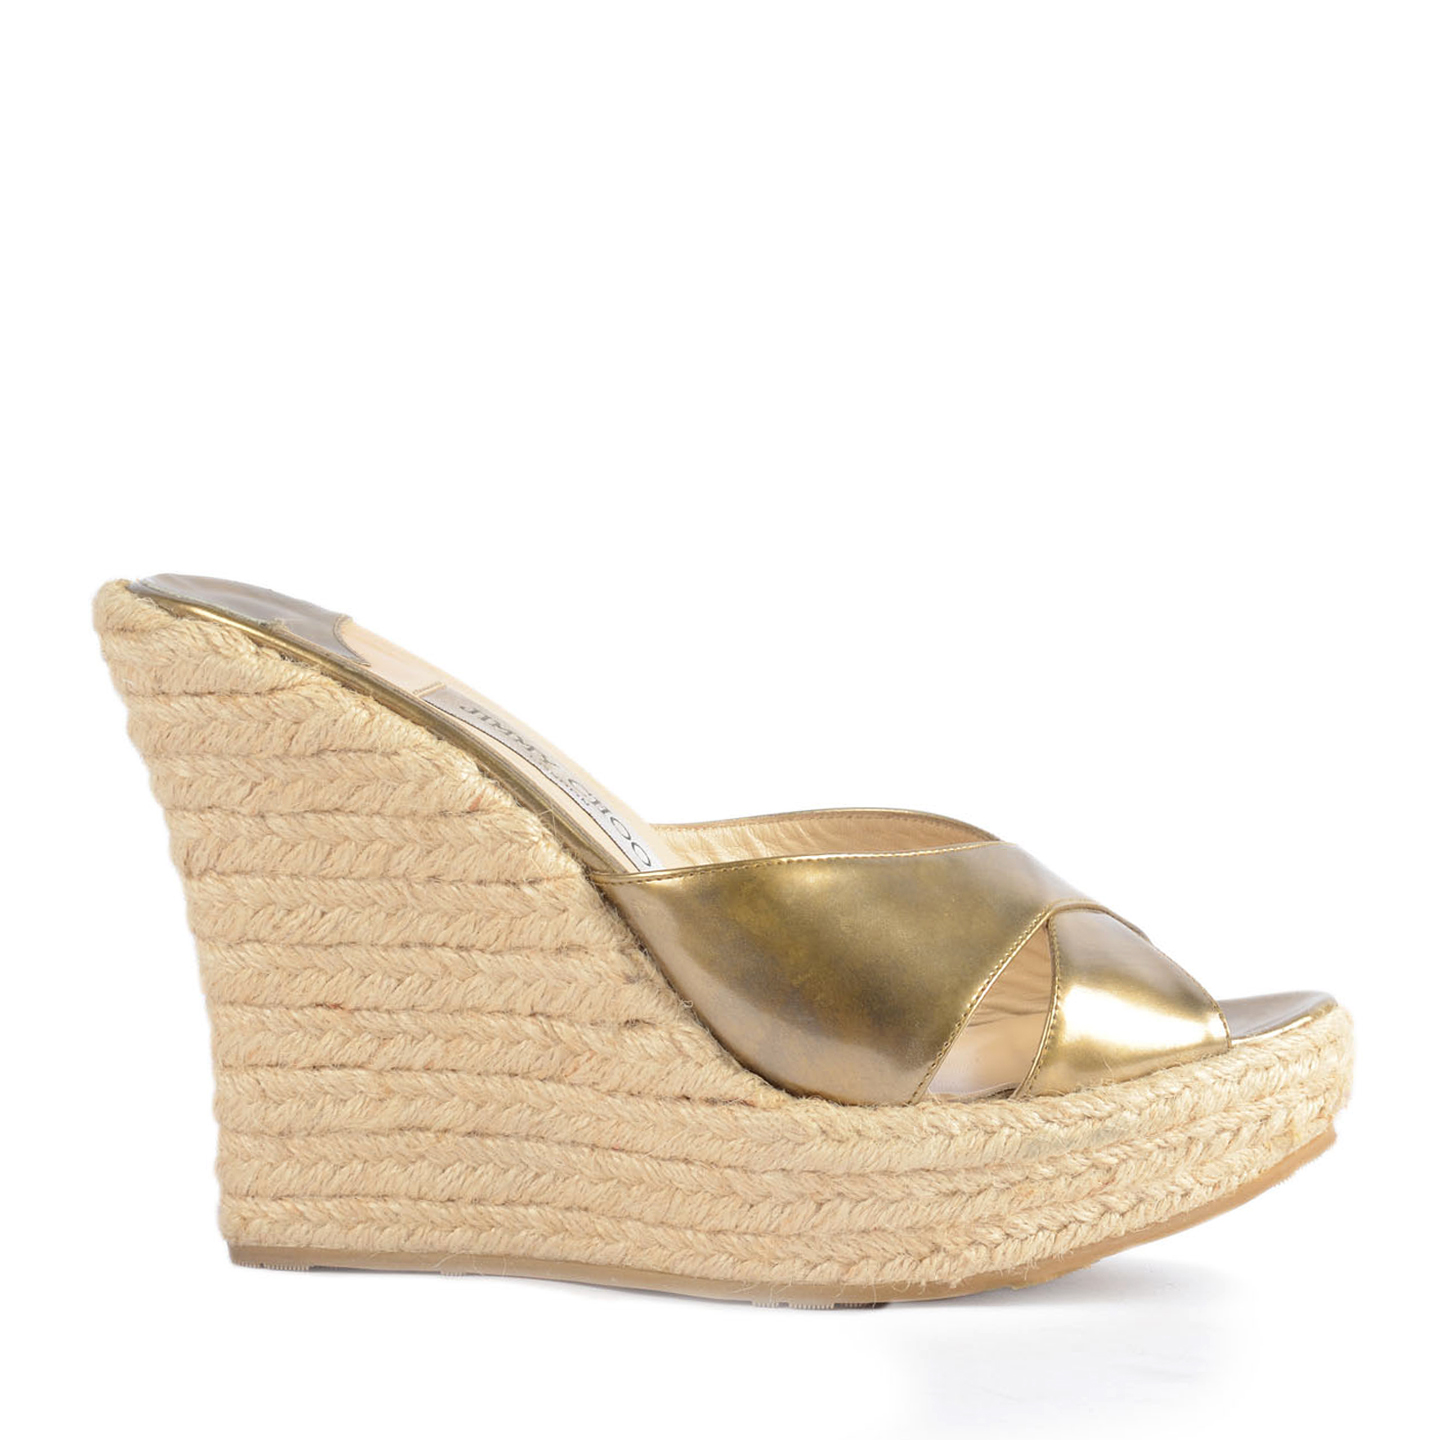 Jimmy Choo Metallic ‘Phyllis’ Espadrilles Wedges Size 39 - LabelCentric